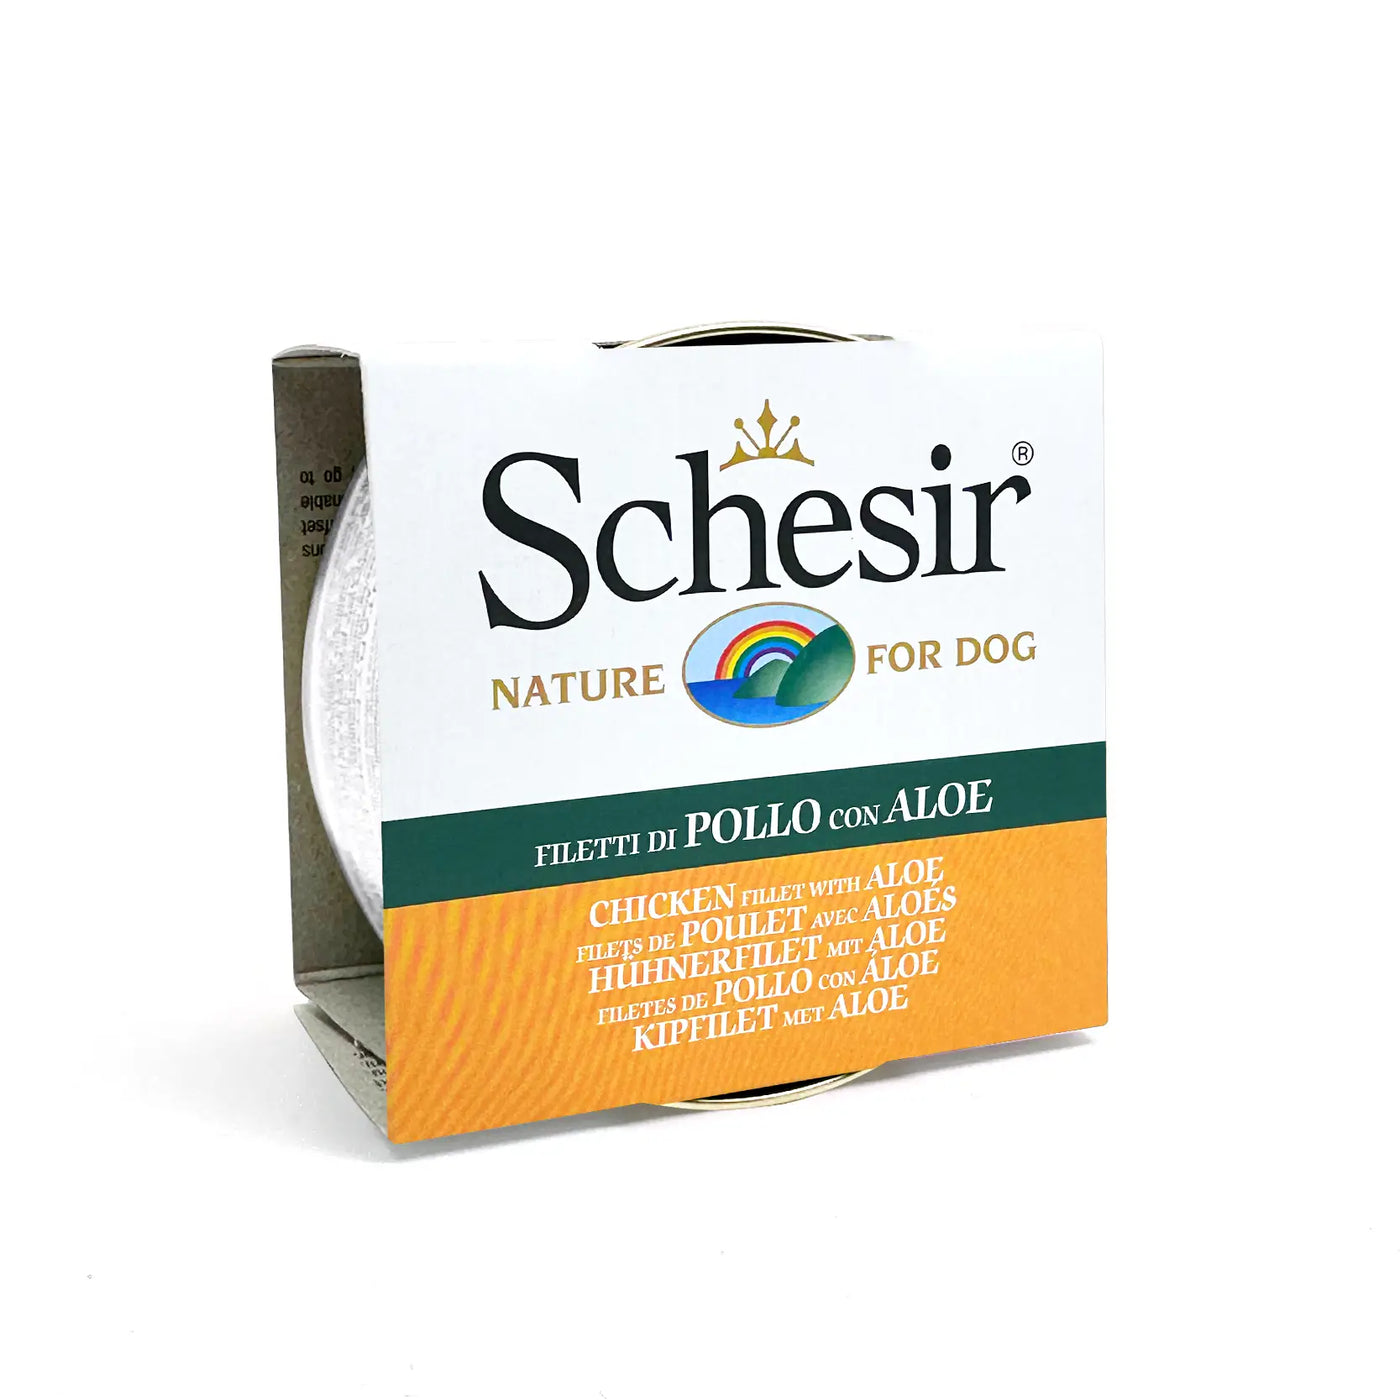 Schesir - Complementary Wet Food for Adult Dogs - Chicken Fillets with Aloe in Jelly 150g